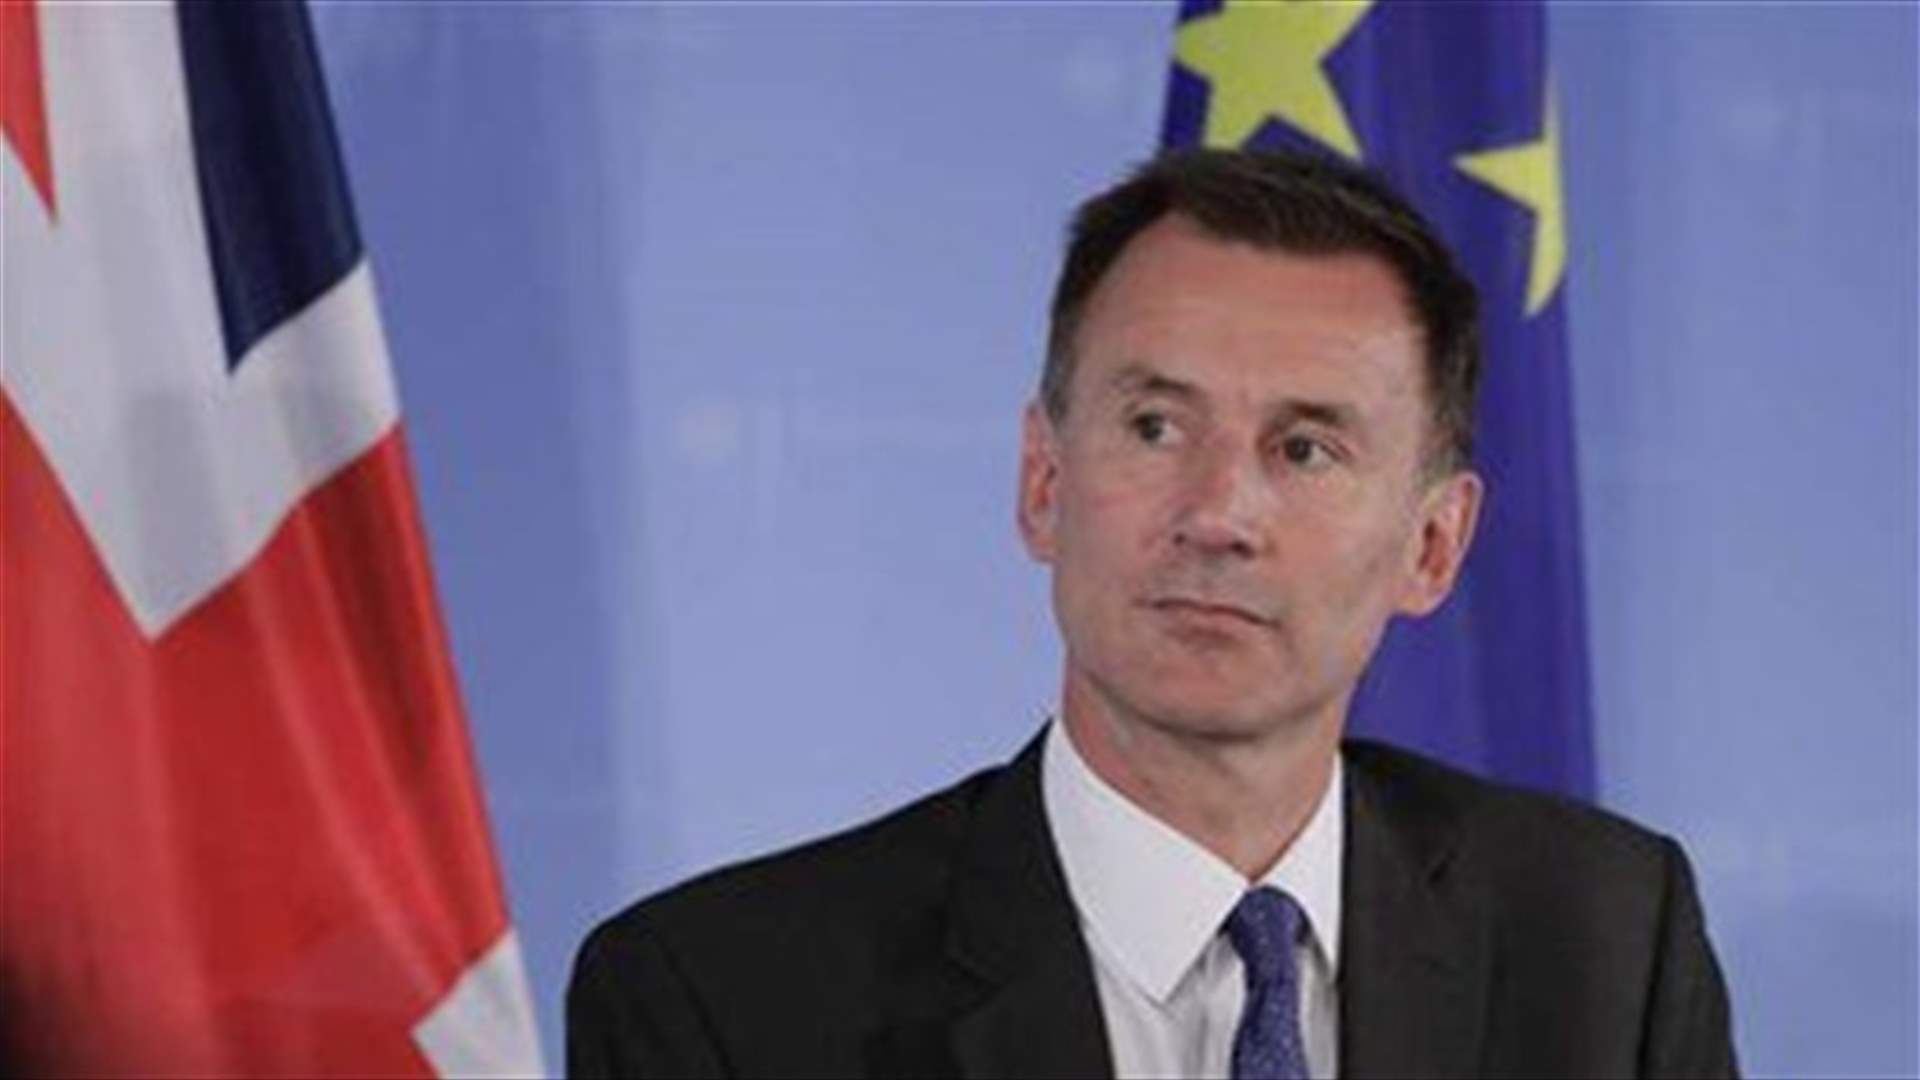 UK&#39;s Hunt lands in Iran to discuss nuclear deal, bilateral issues - TV